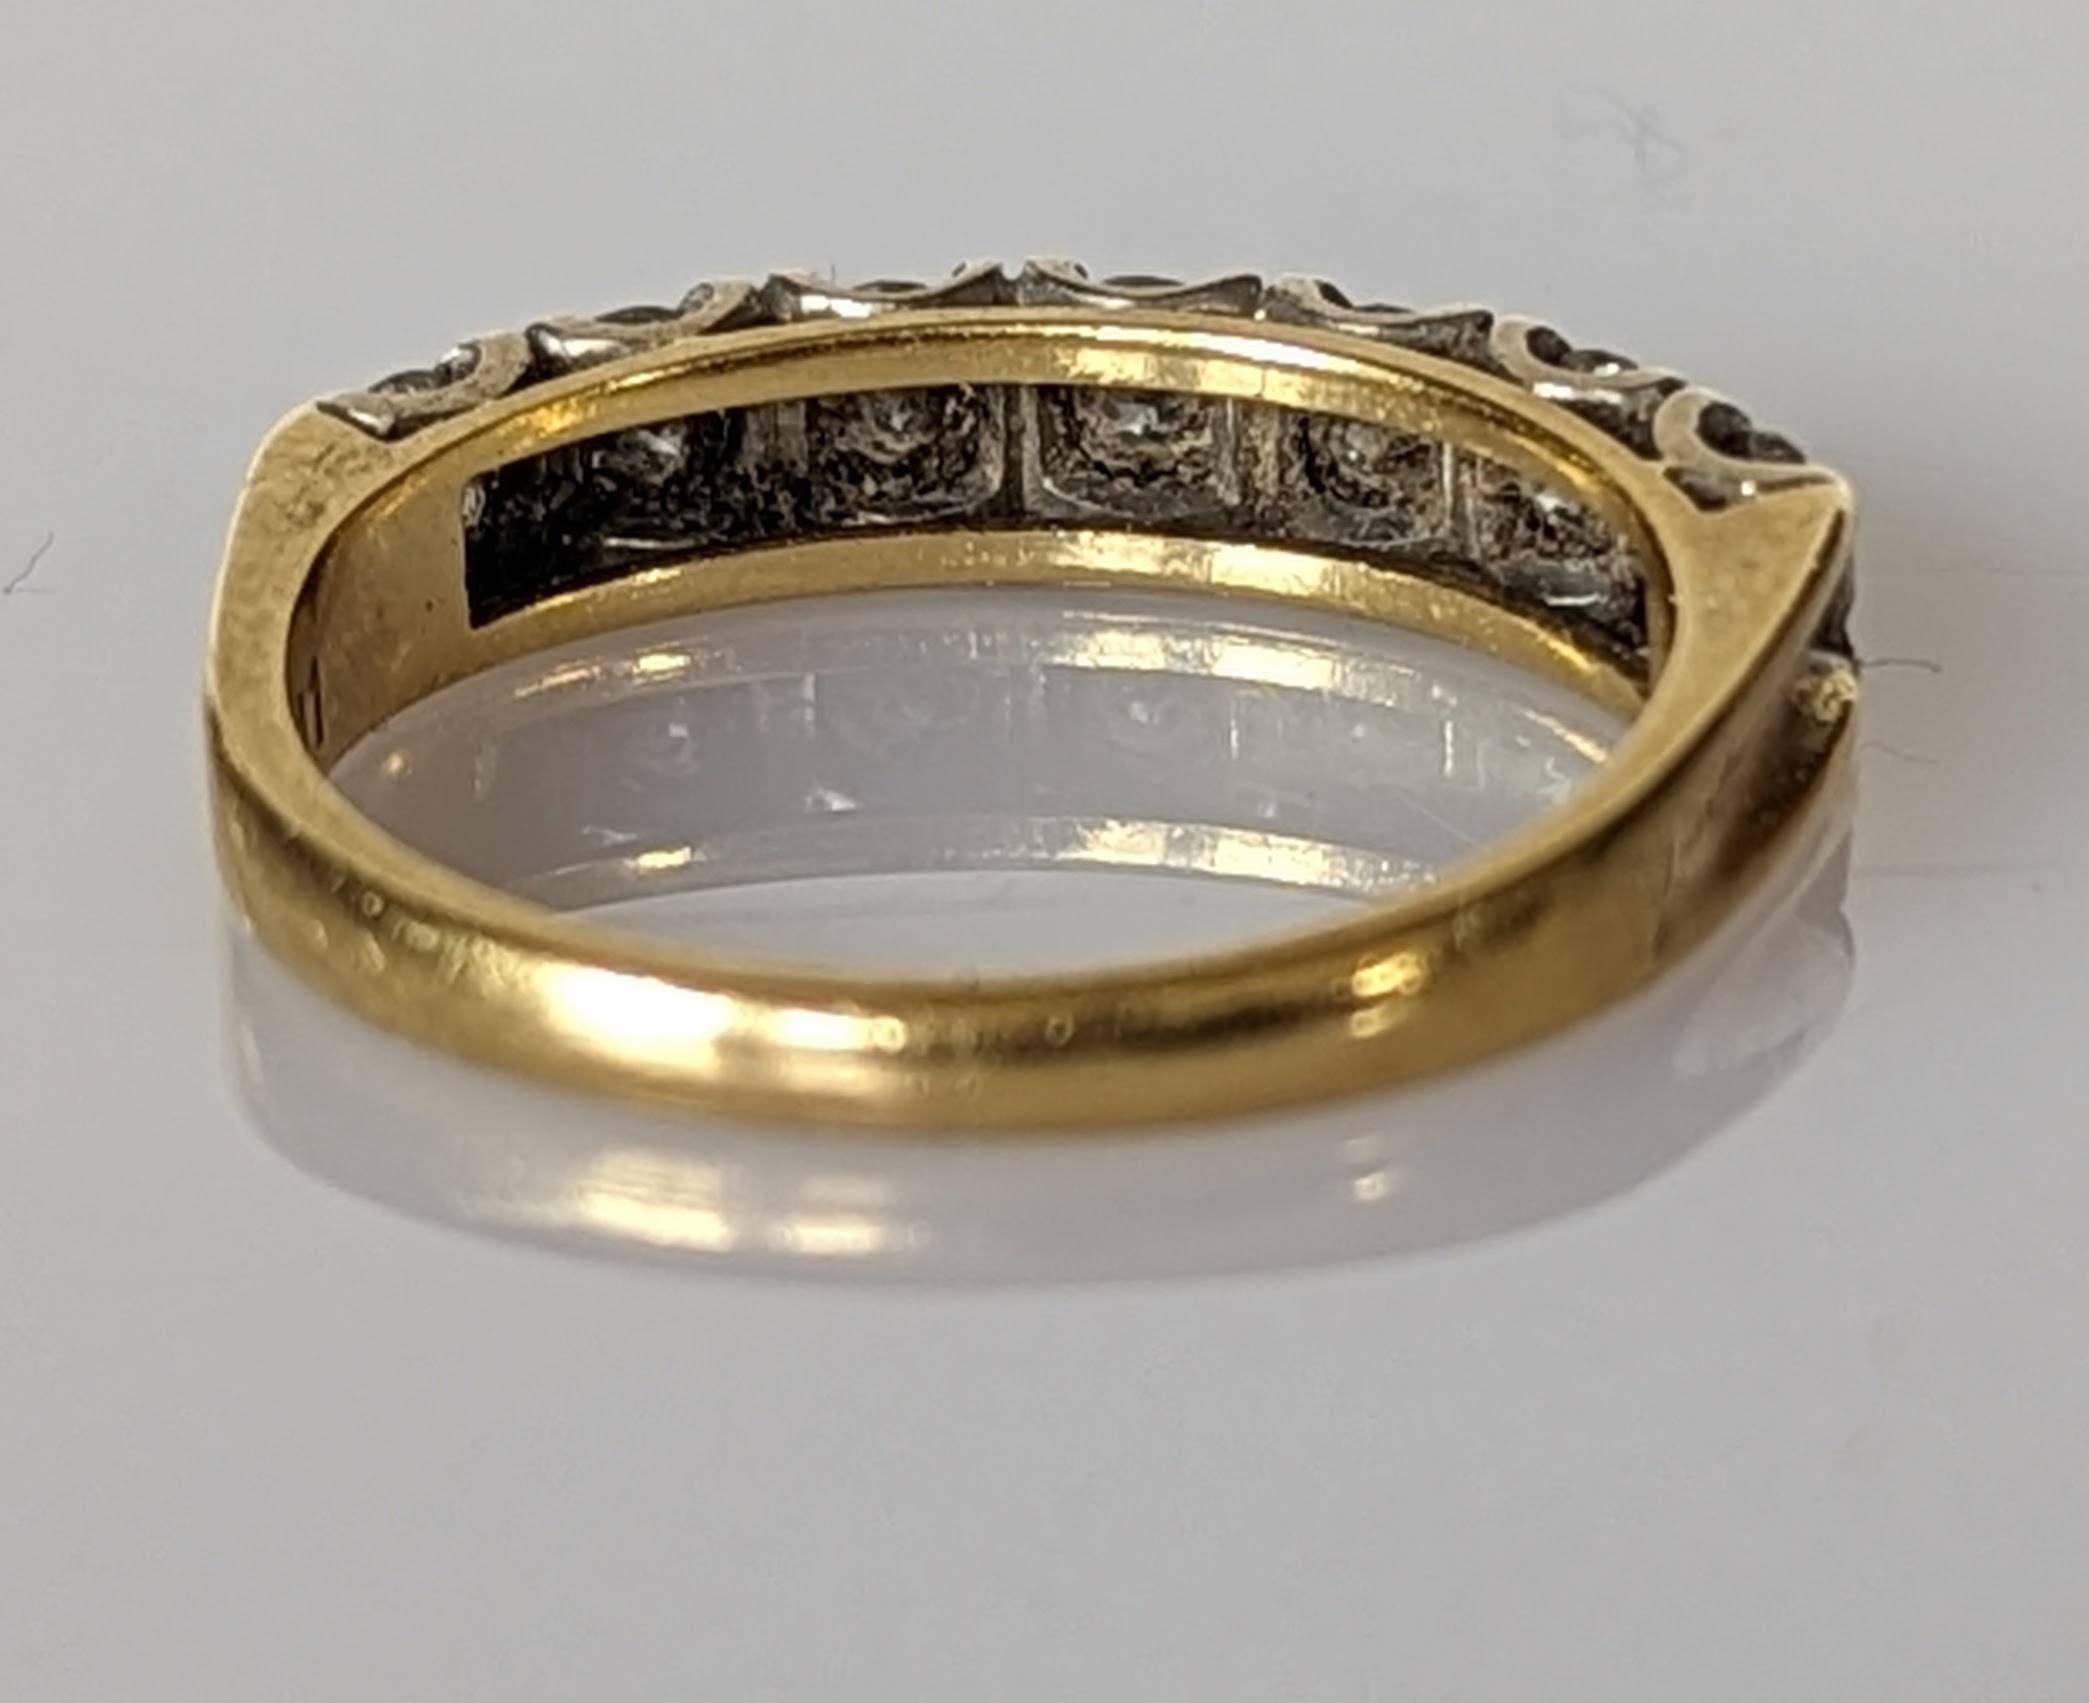 A half-hoop diamond eternity ring on a yellow gold setting - Image 2 of 3